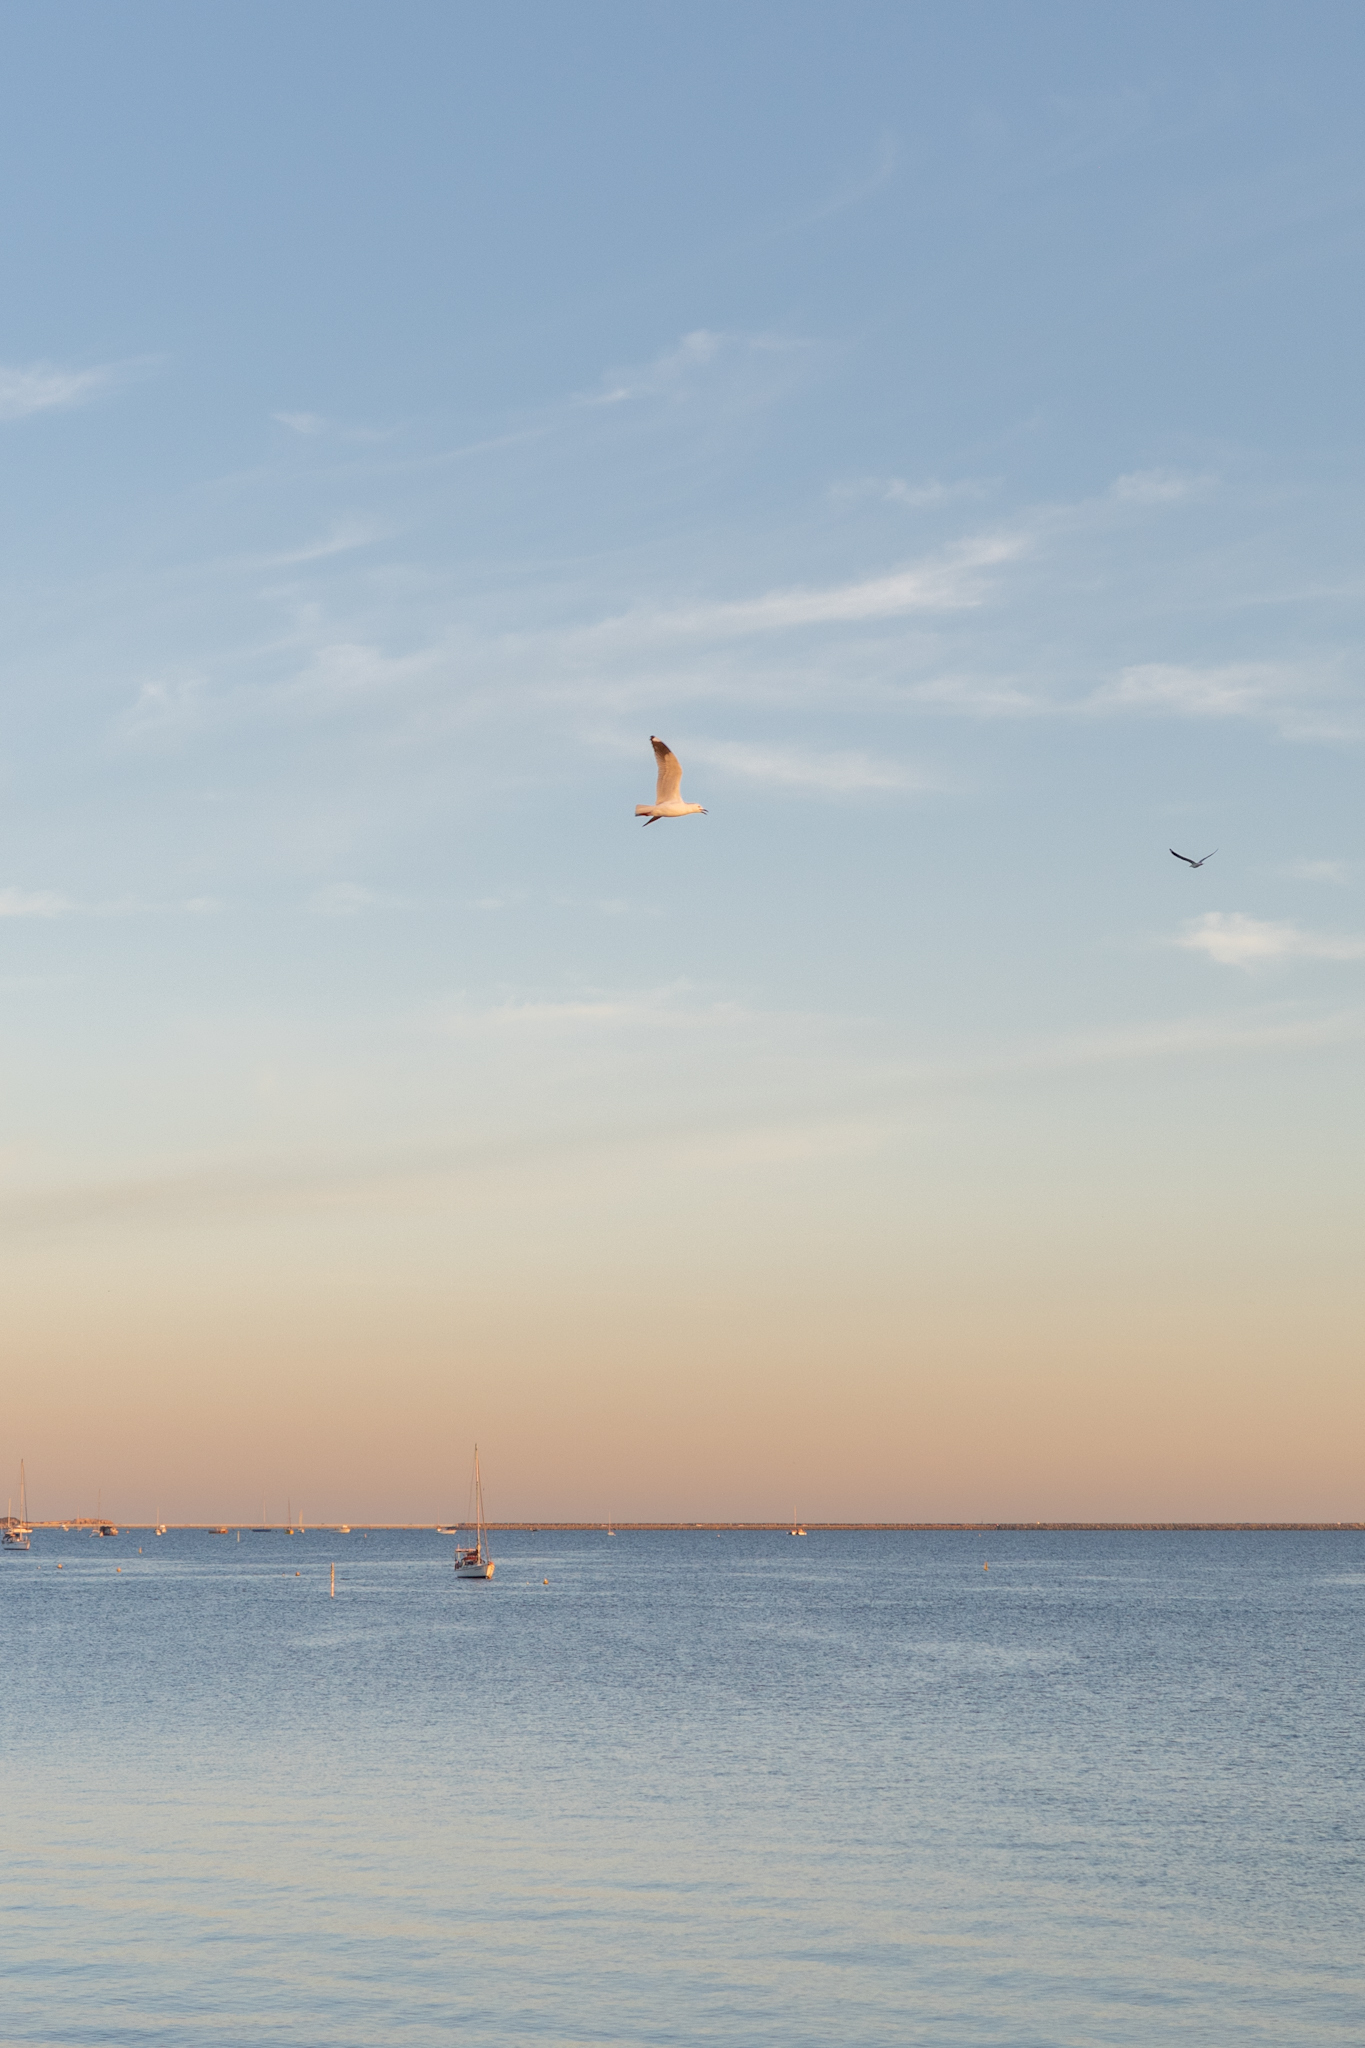 Auto-generated description: A serene scene featuring a seagull in flight over a calm body of water with a pastel-colored sky and distant boats at the horizon.